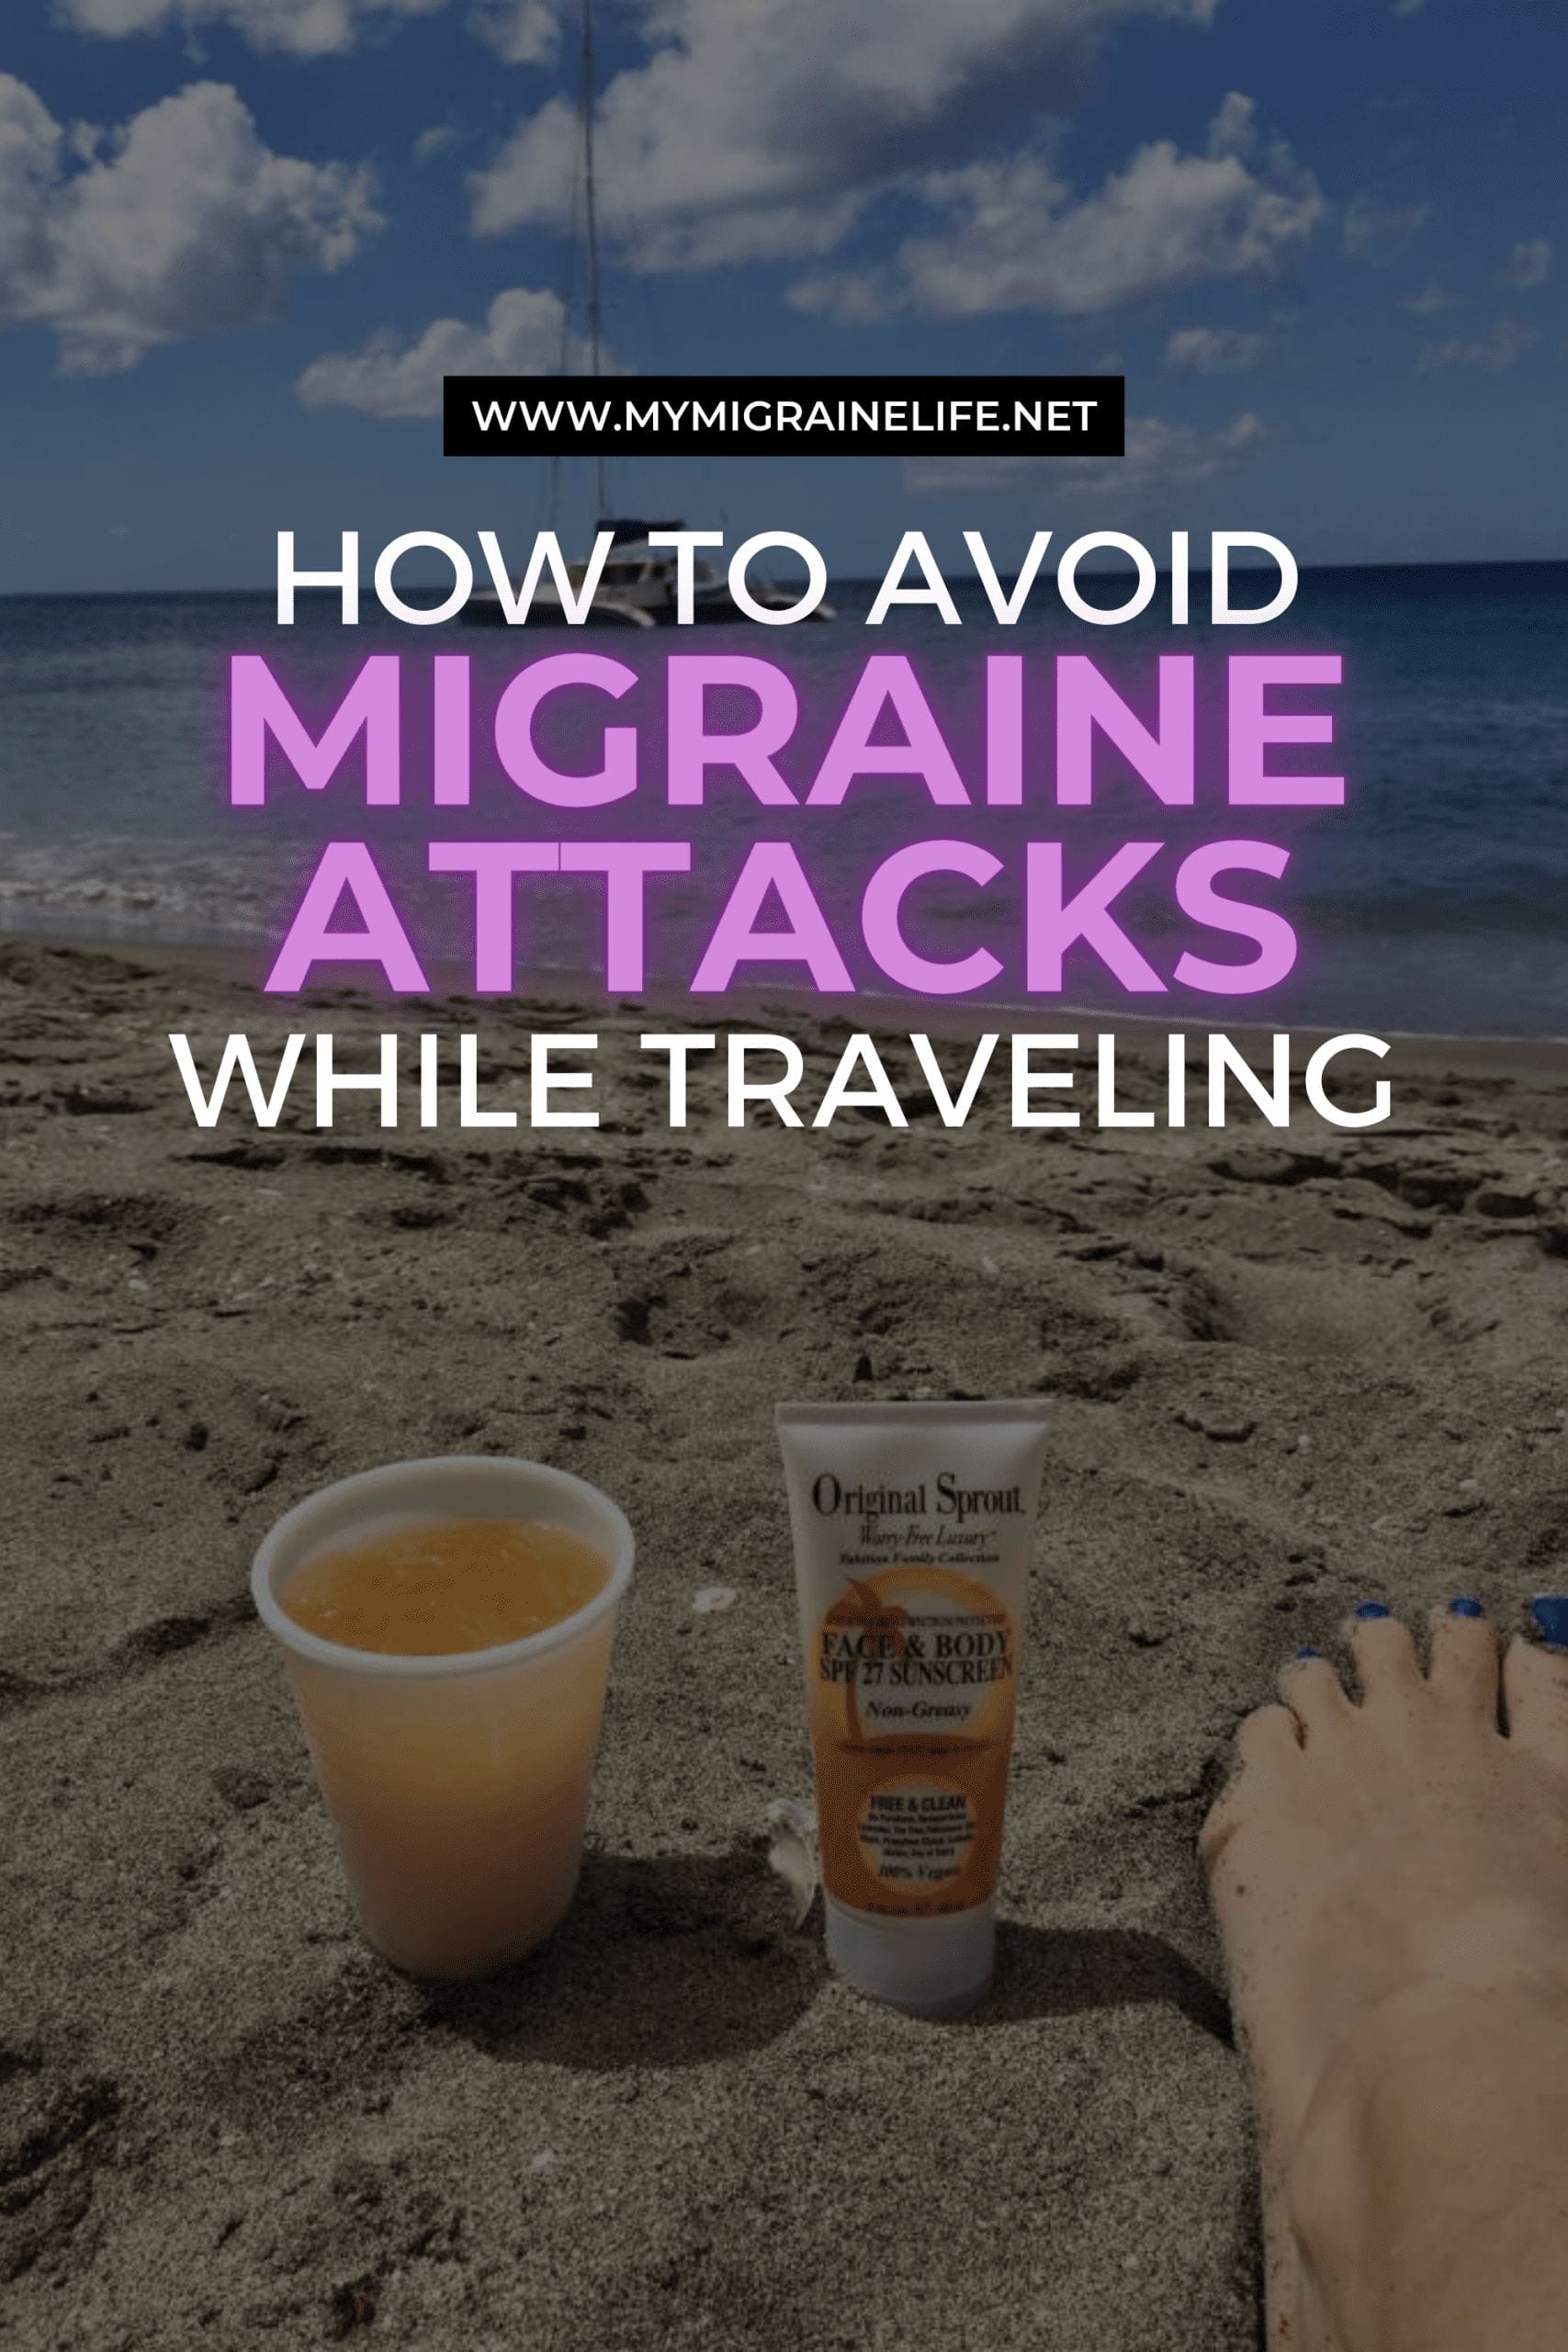 How to Avoid Migraine Attacks While Traveling